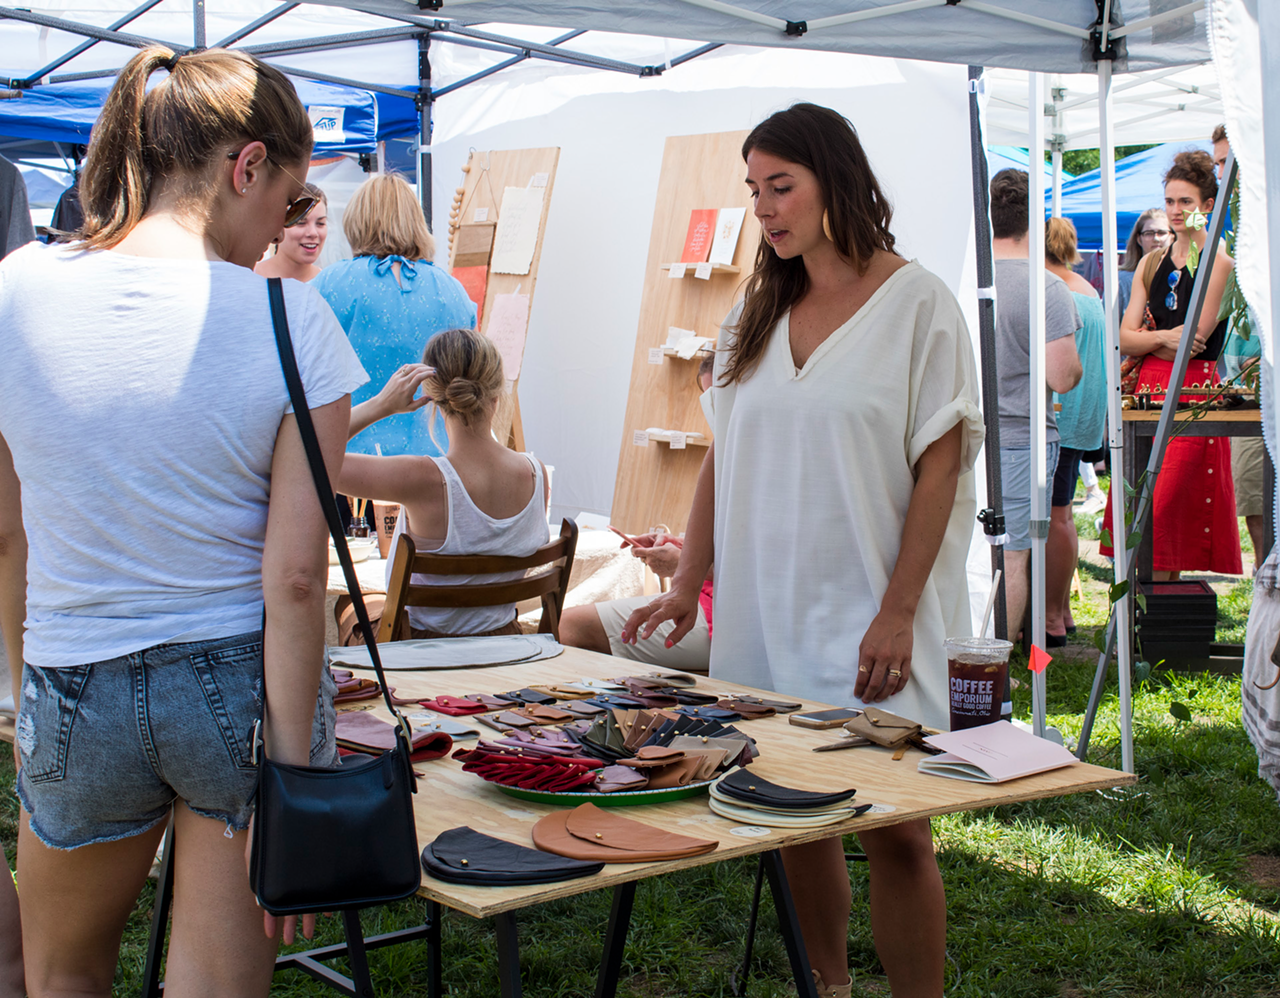 PHOTOS: OTR's June City Flea with Crafted Goods, Local Bites and the Blazing Sun